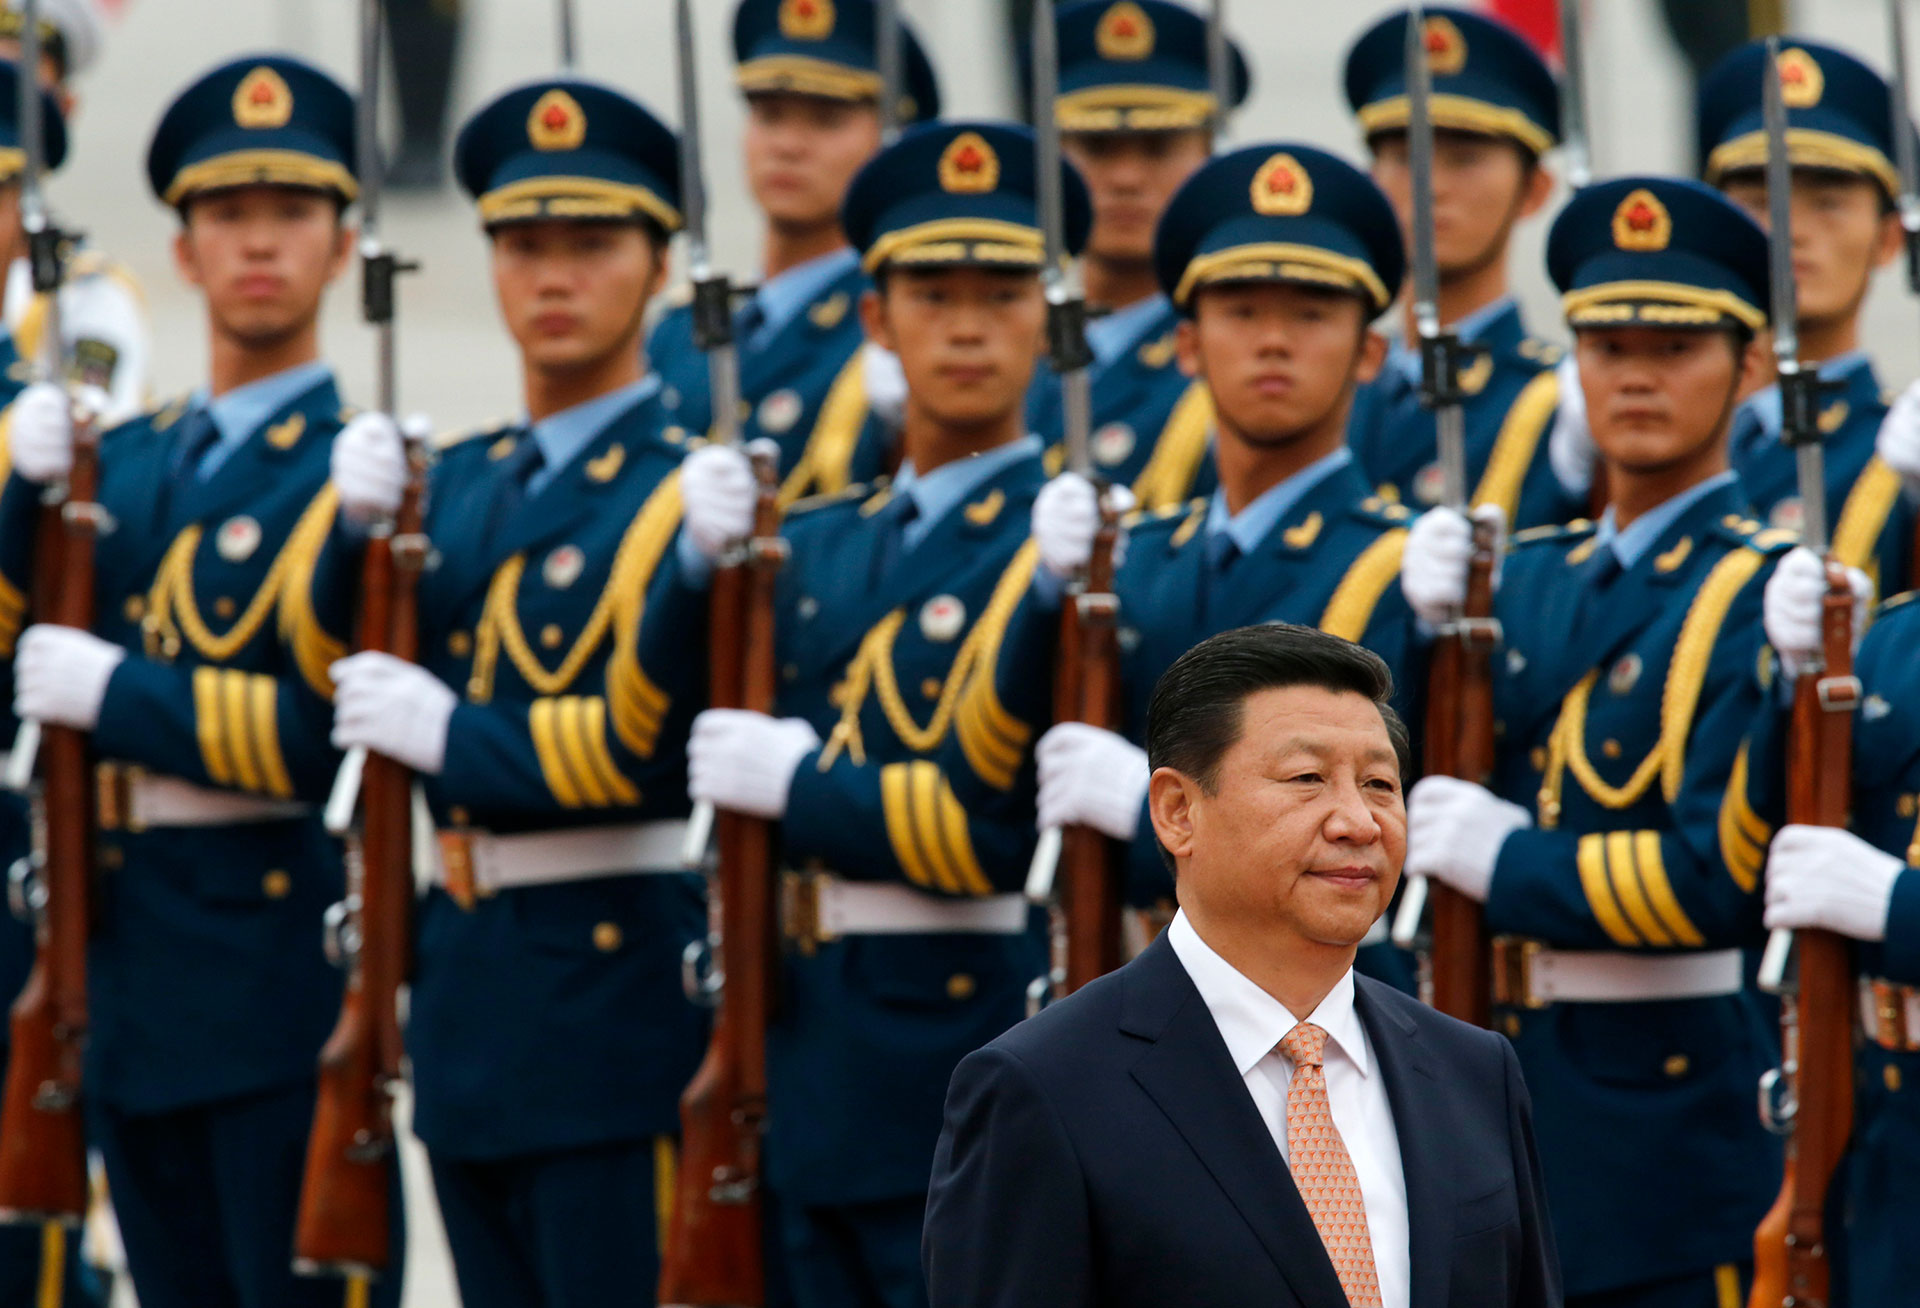 Chinese spies have penetrated Taiwan’s military, case documents reveal